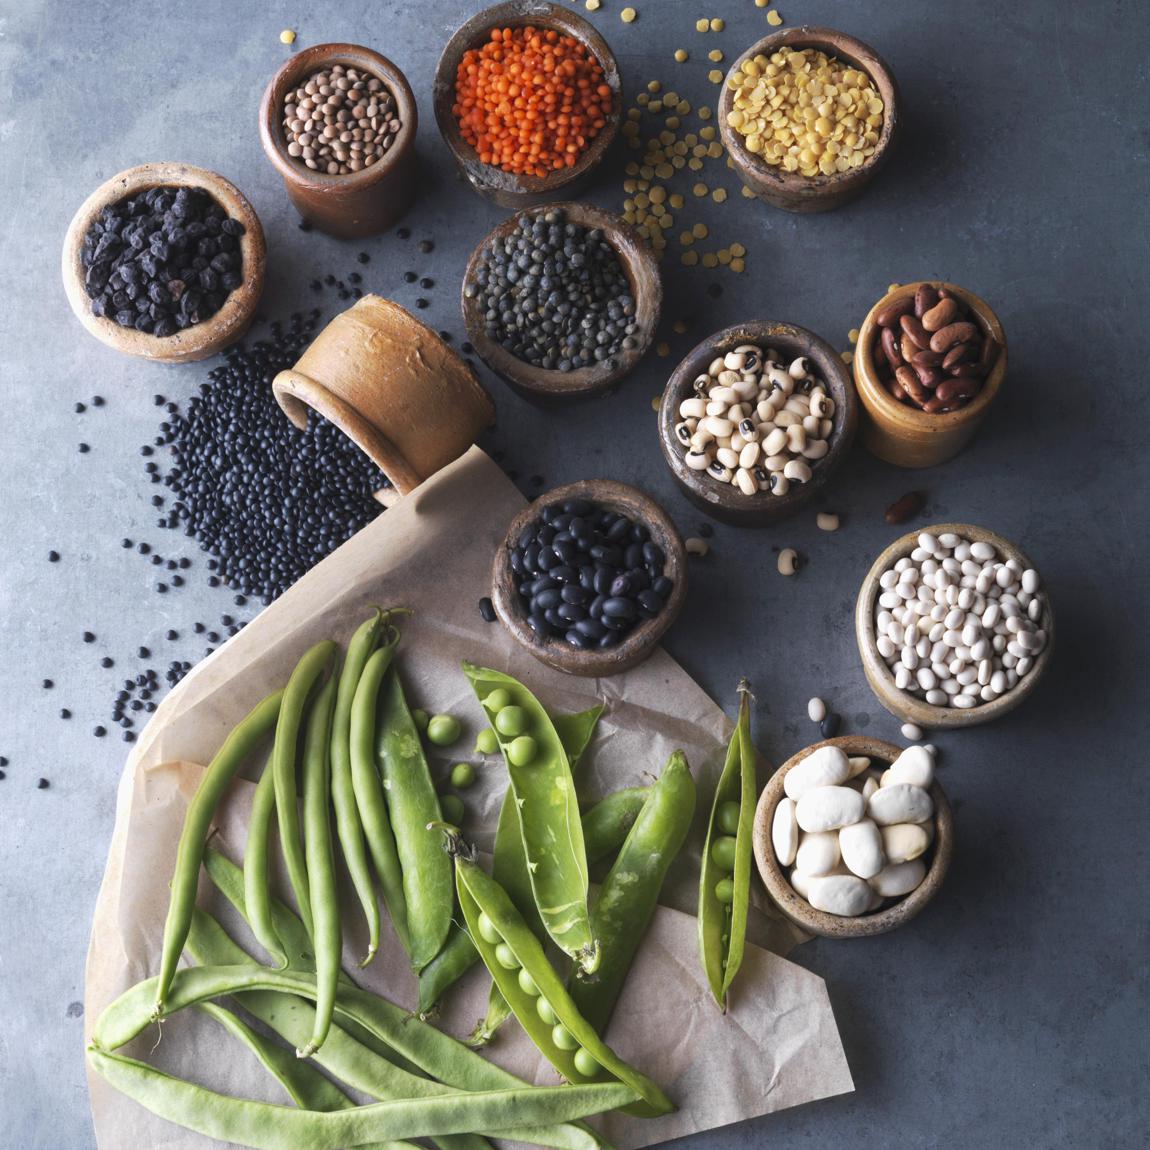 An arrangement of fresh and dries legumes